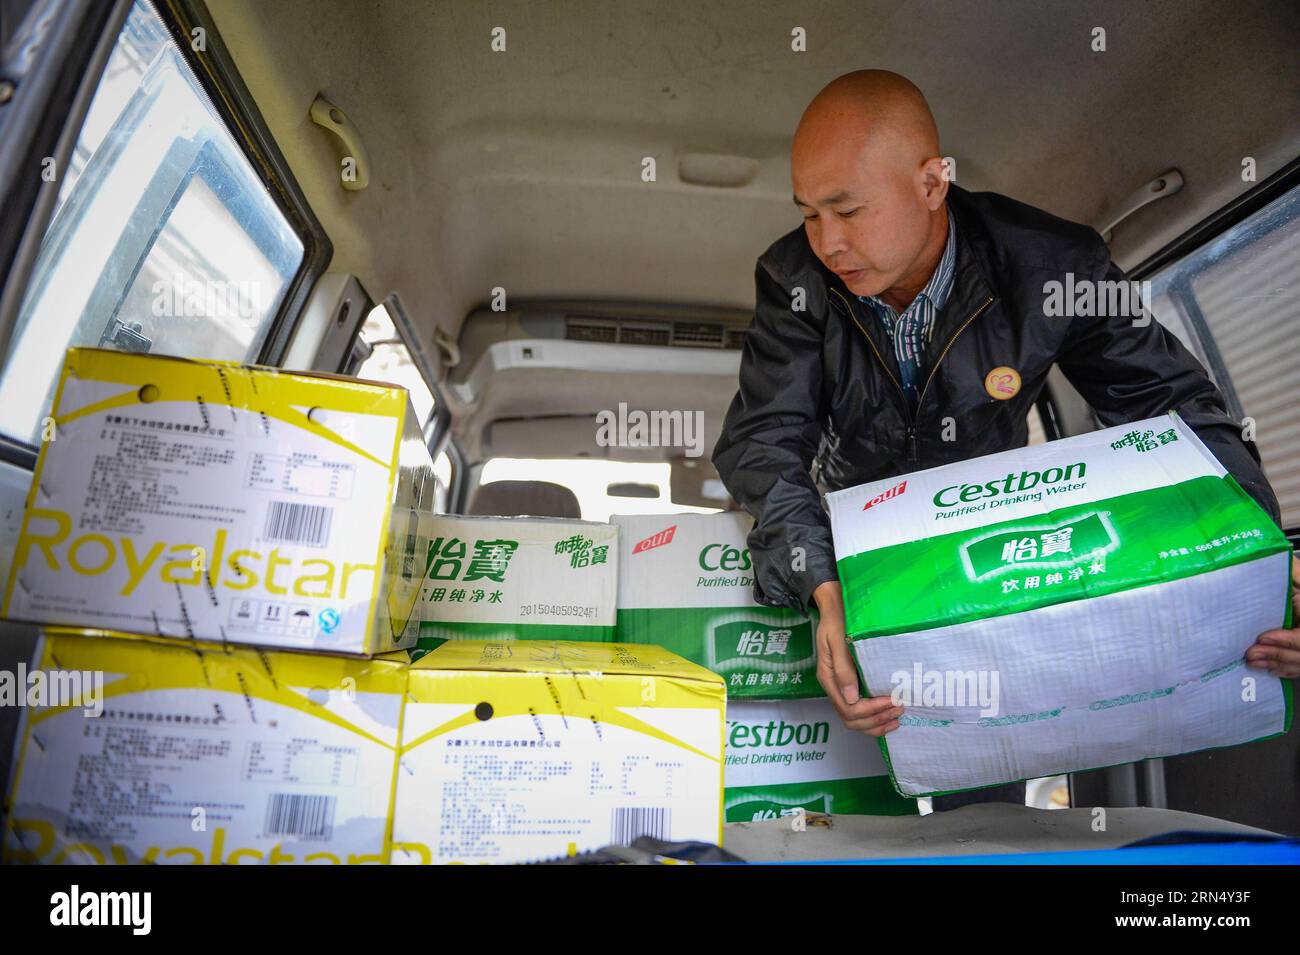 (150604) -- JIANLI, June 4, 2015 -- Resident Xiao Jianmin transports goods to a rescue base in Jianli, central China s Hubei Province, June 4, 2015. Xiao, 45, is the owner of an optical shop in Jianli. He volunteered to join in the rescue effort by offering rescuers and relatives of victims 400 boxes of bottled water and 60 boxes of instant noodles for free. A cruise ship carrying more than 450 people on Monday sank in the Jianli section of the Yangtze River. ) (wyo) CHINA-HUBEI-JIANLI-SHIP SINKING-RESCUE (CN) LixXiang PUBLICATIONxNOTxINxCHN   Jianli June 4 2015 Resident Xiao Jianmin Transport Stock Photo